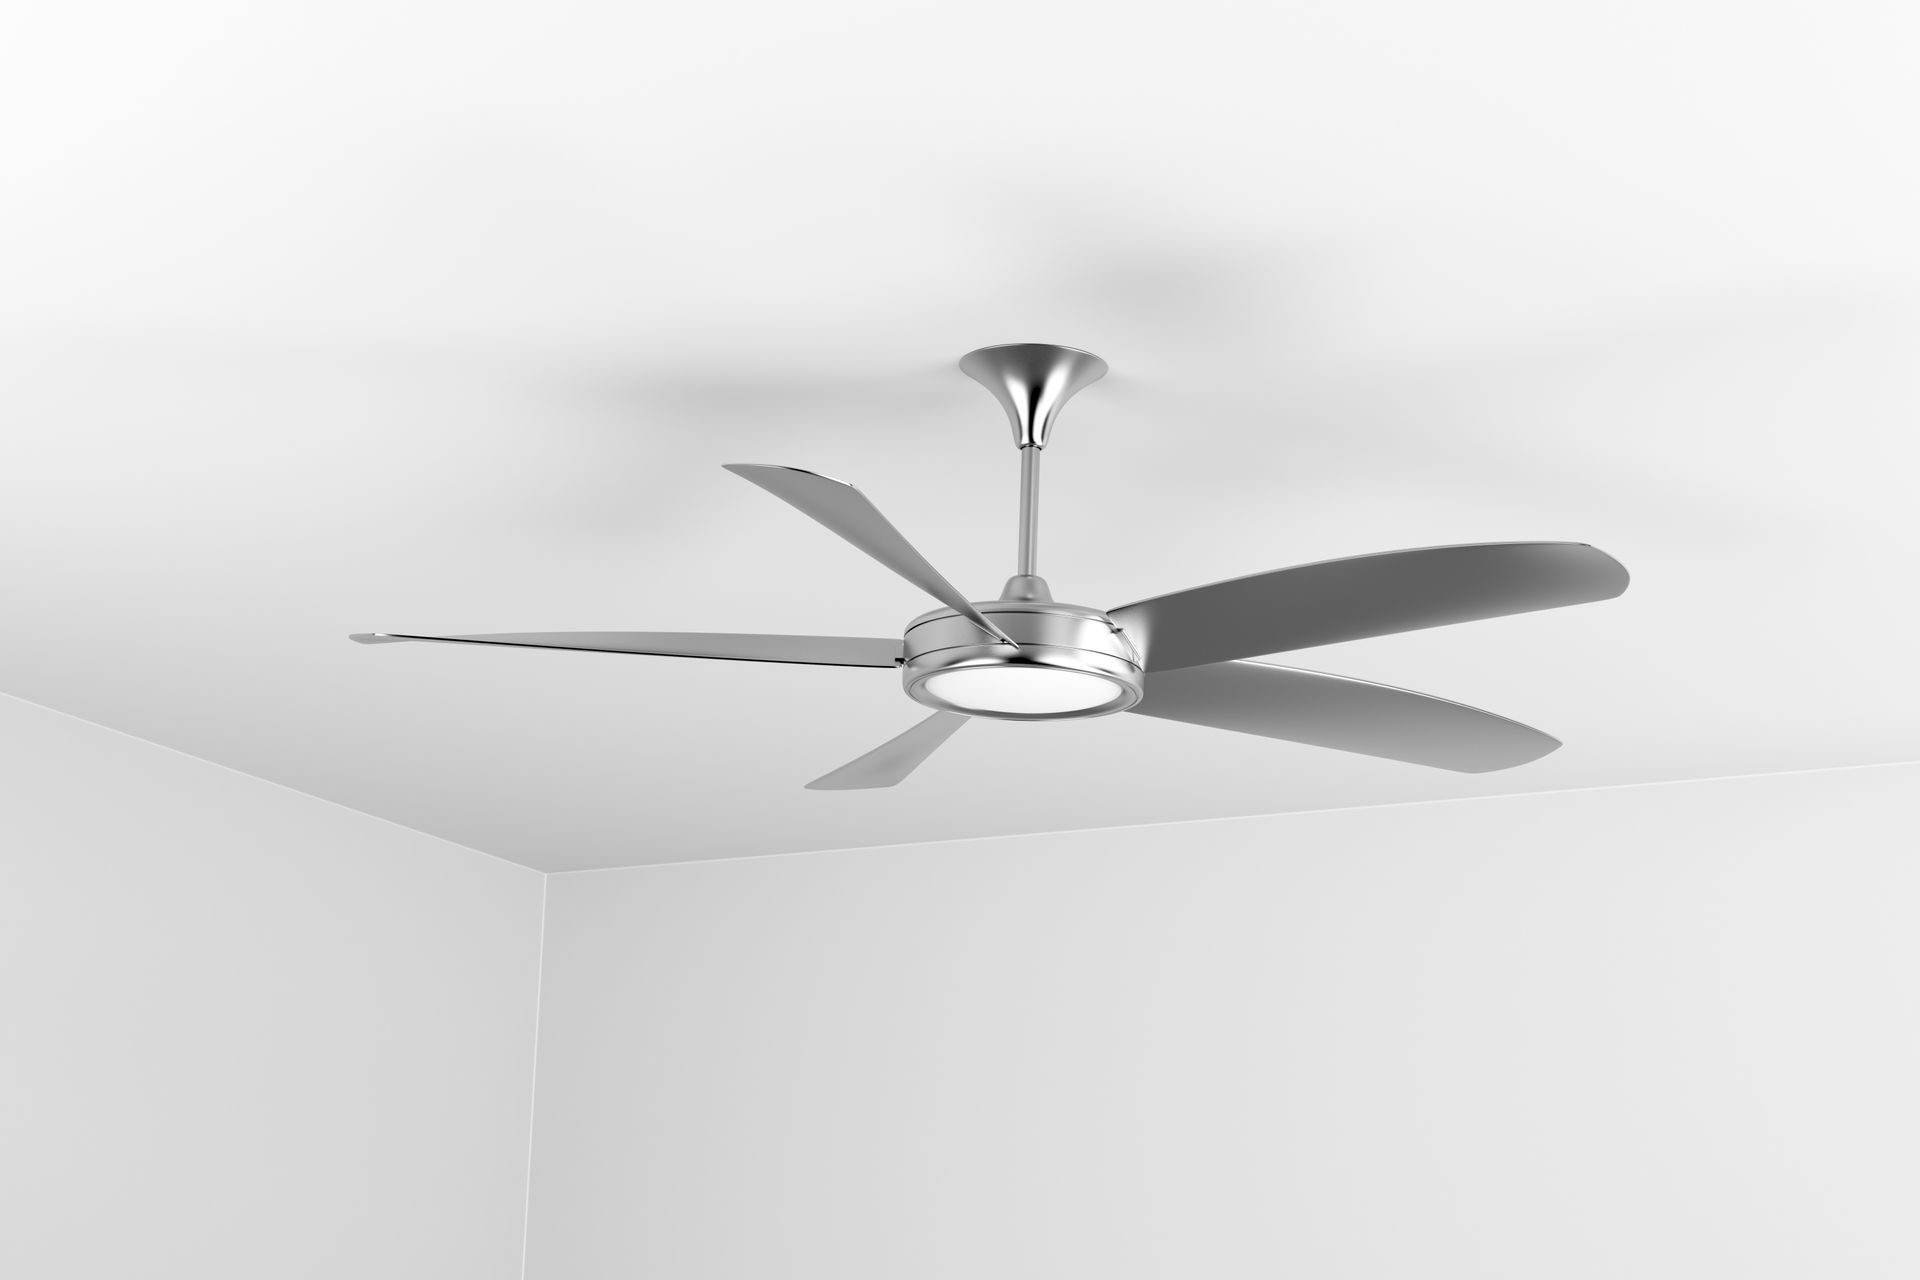 10 Best Ceiling Fans In India August, Best Bldc Ceiling Fans In India 2020